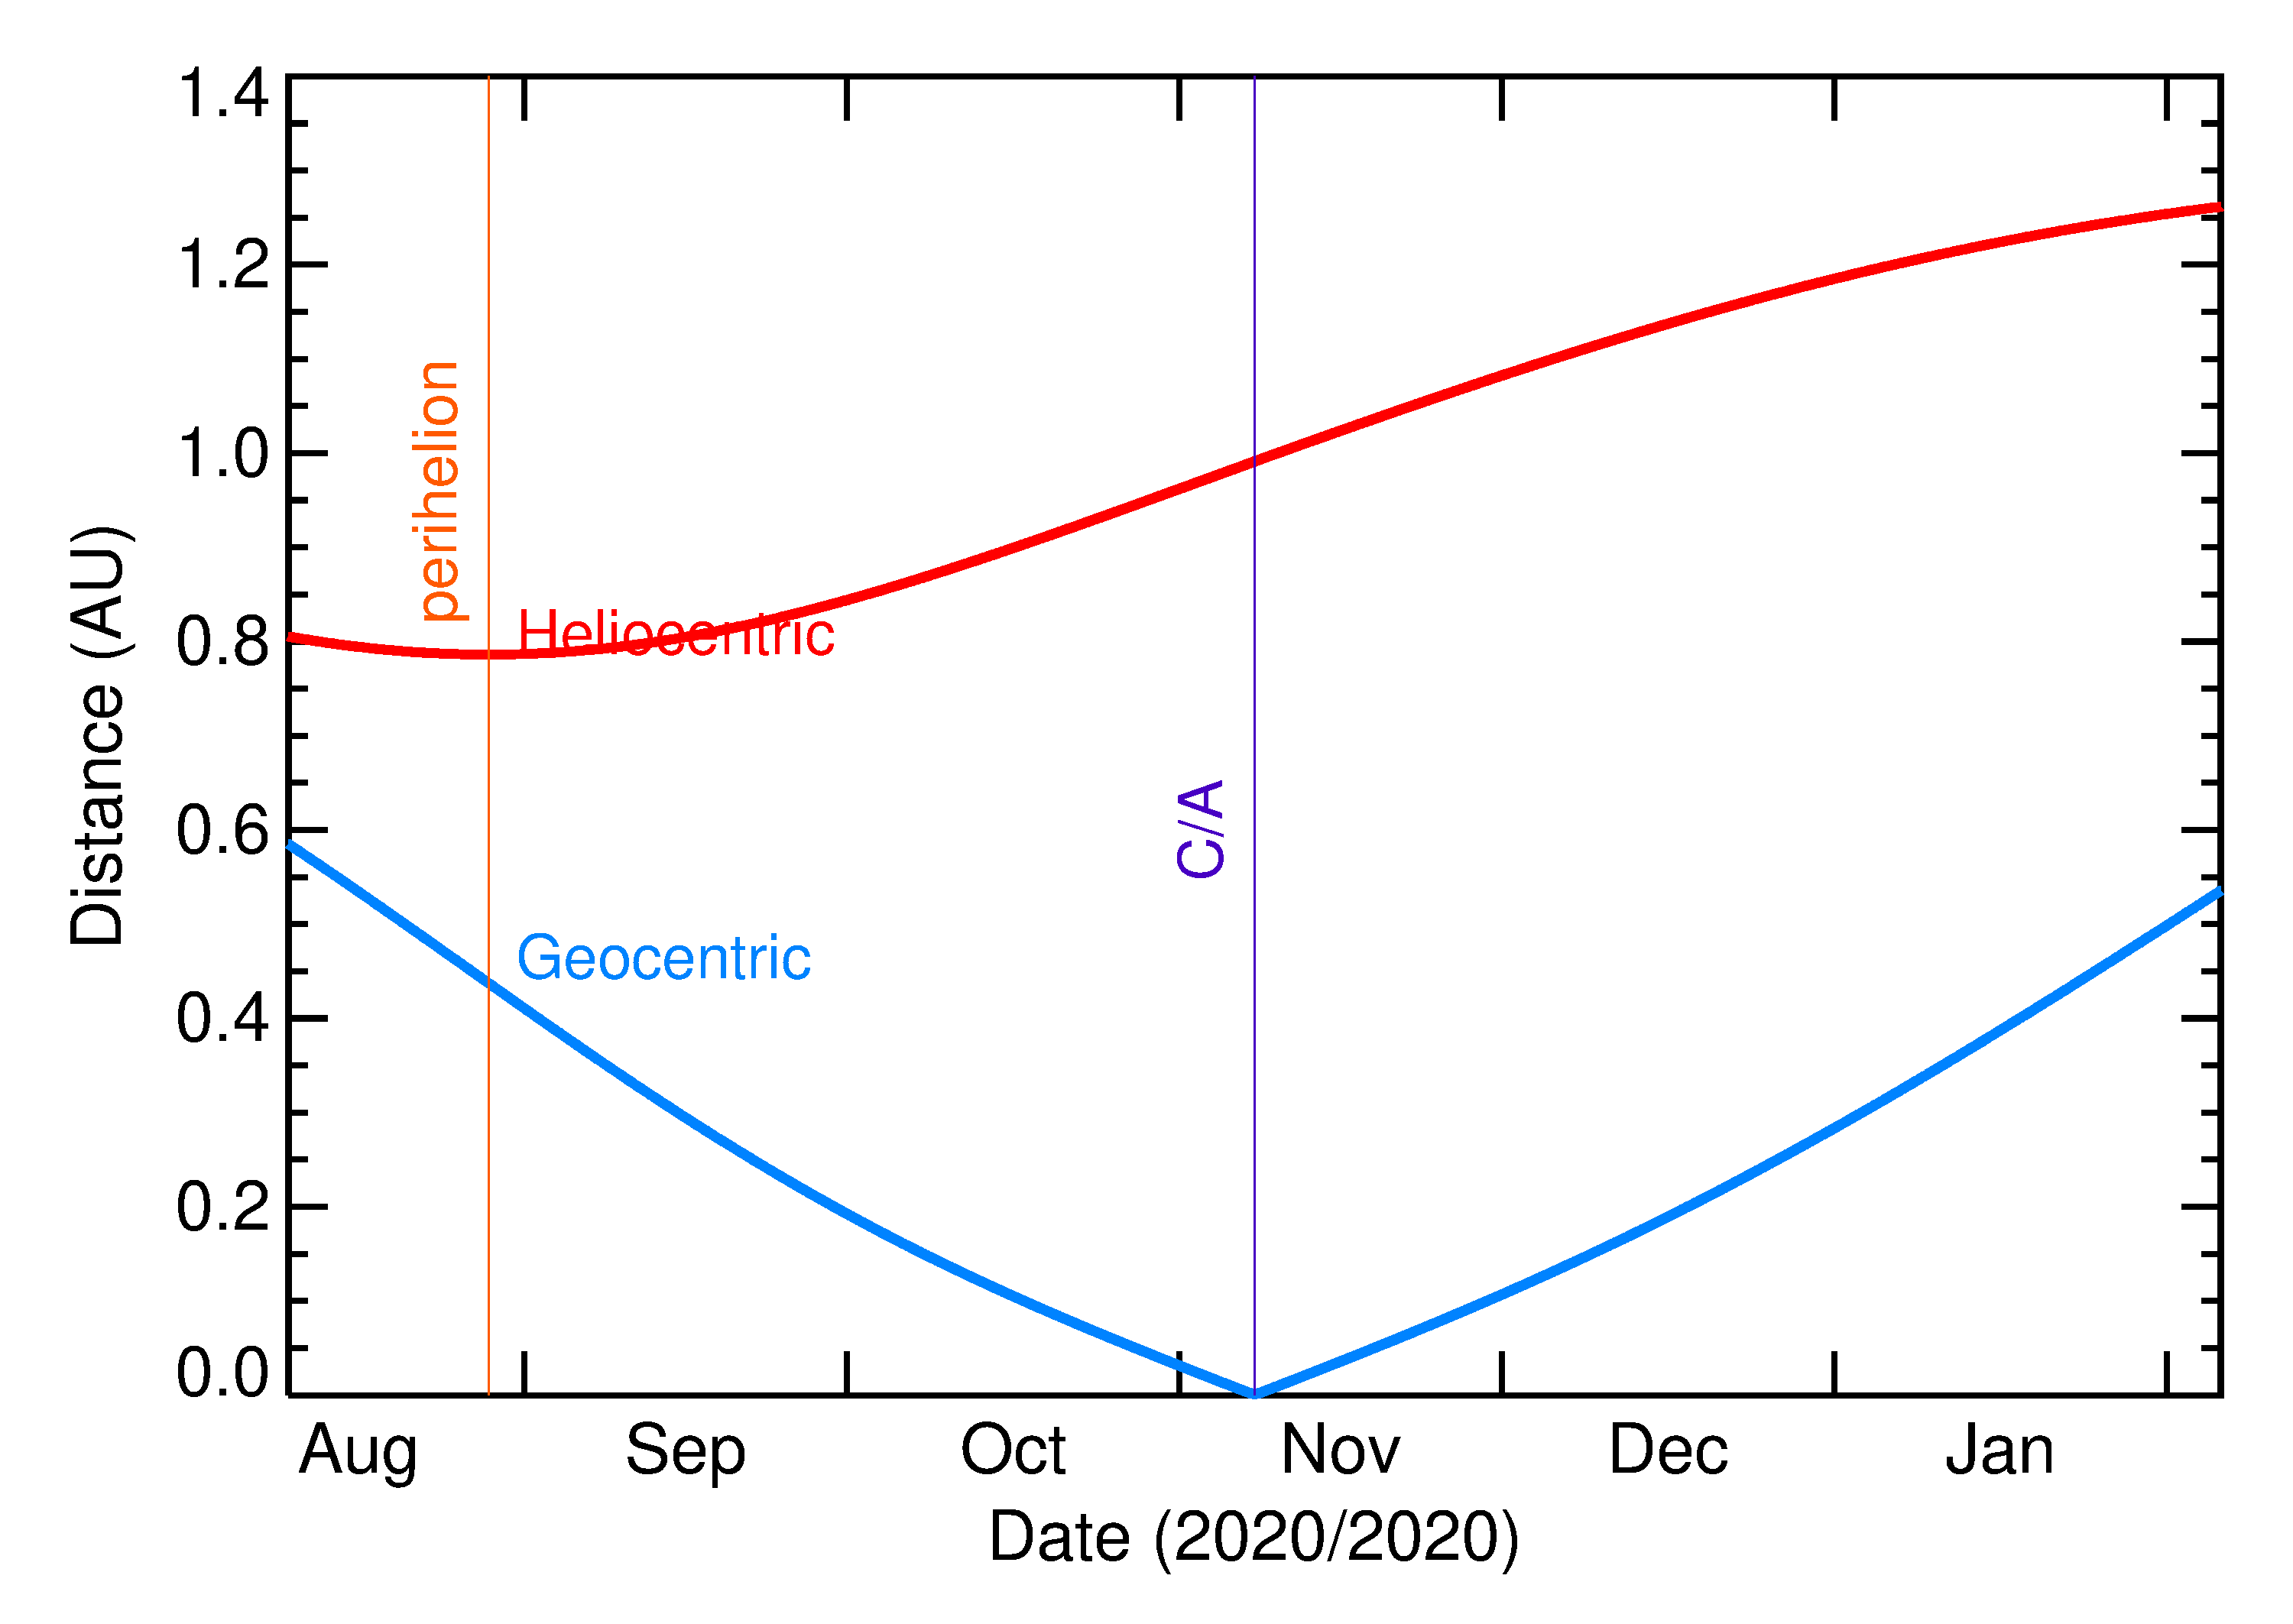 Heliocentric and Geocentric Distances of 2020 VO1 in the months around closest approach